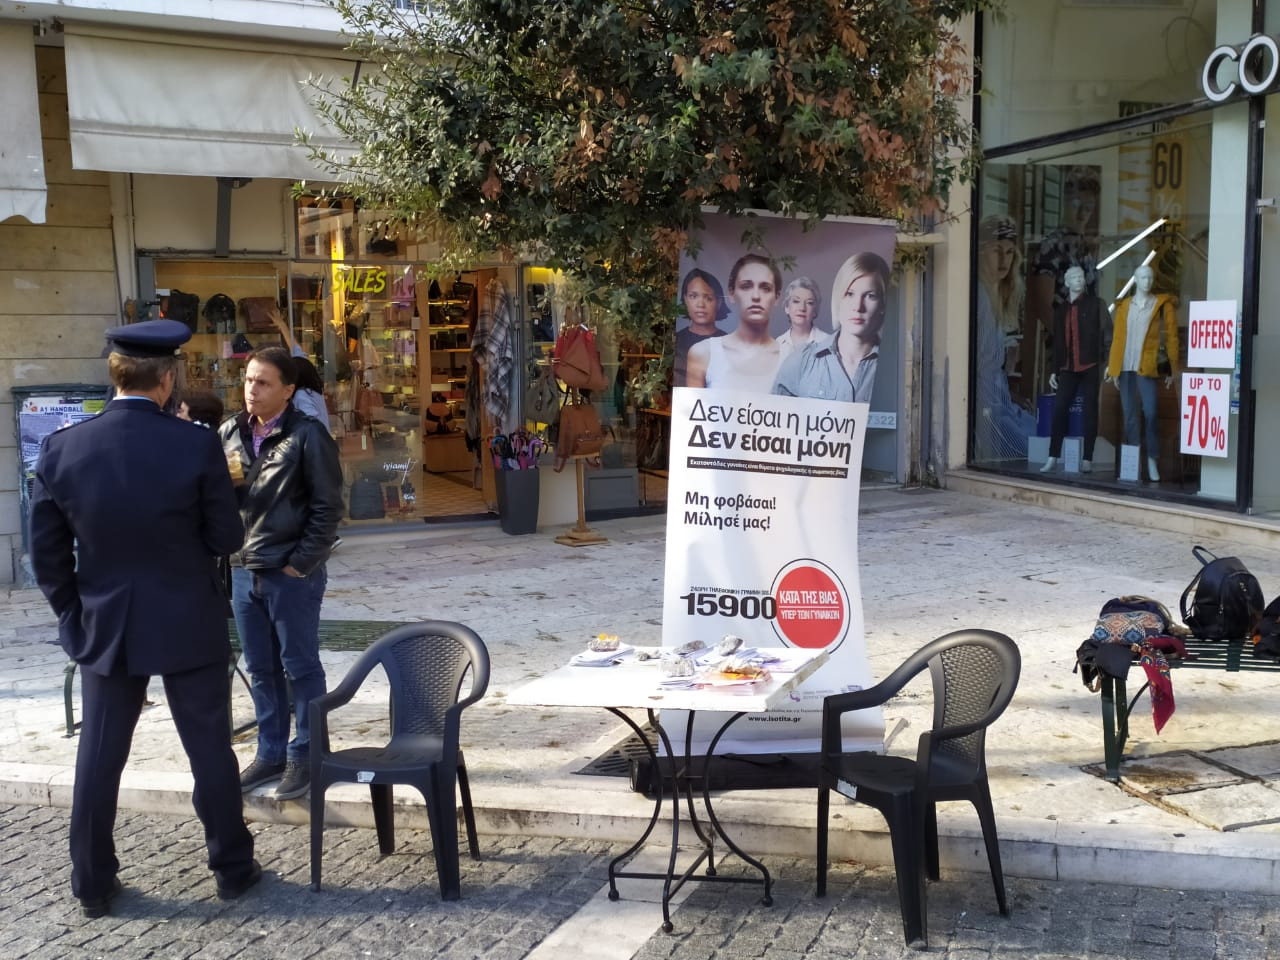 Corfu police inform the public about domestic violence against women